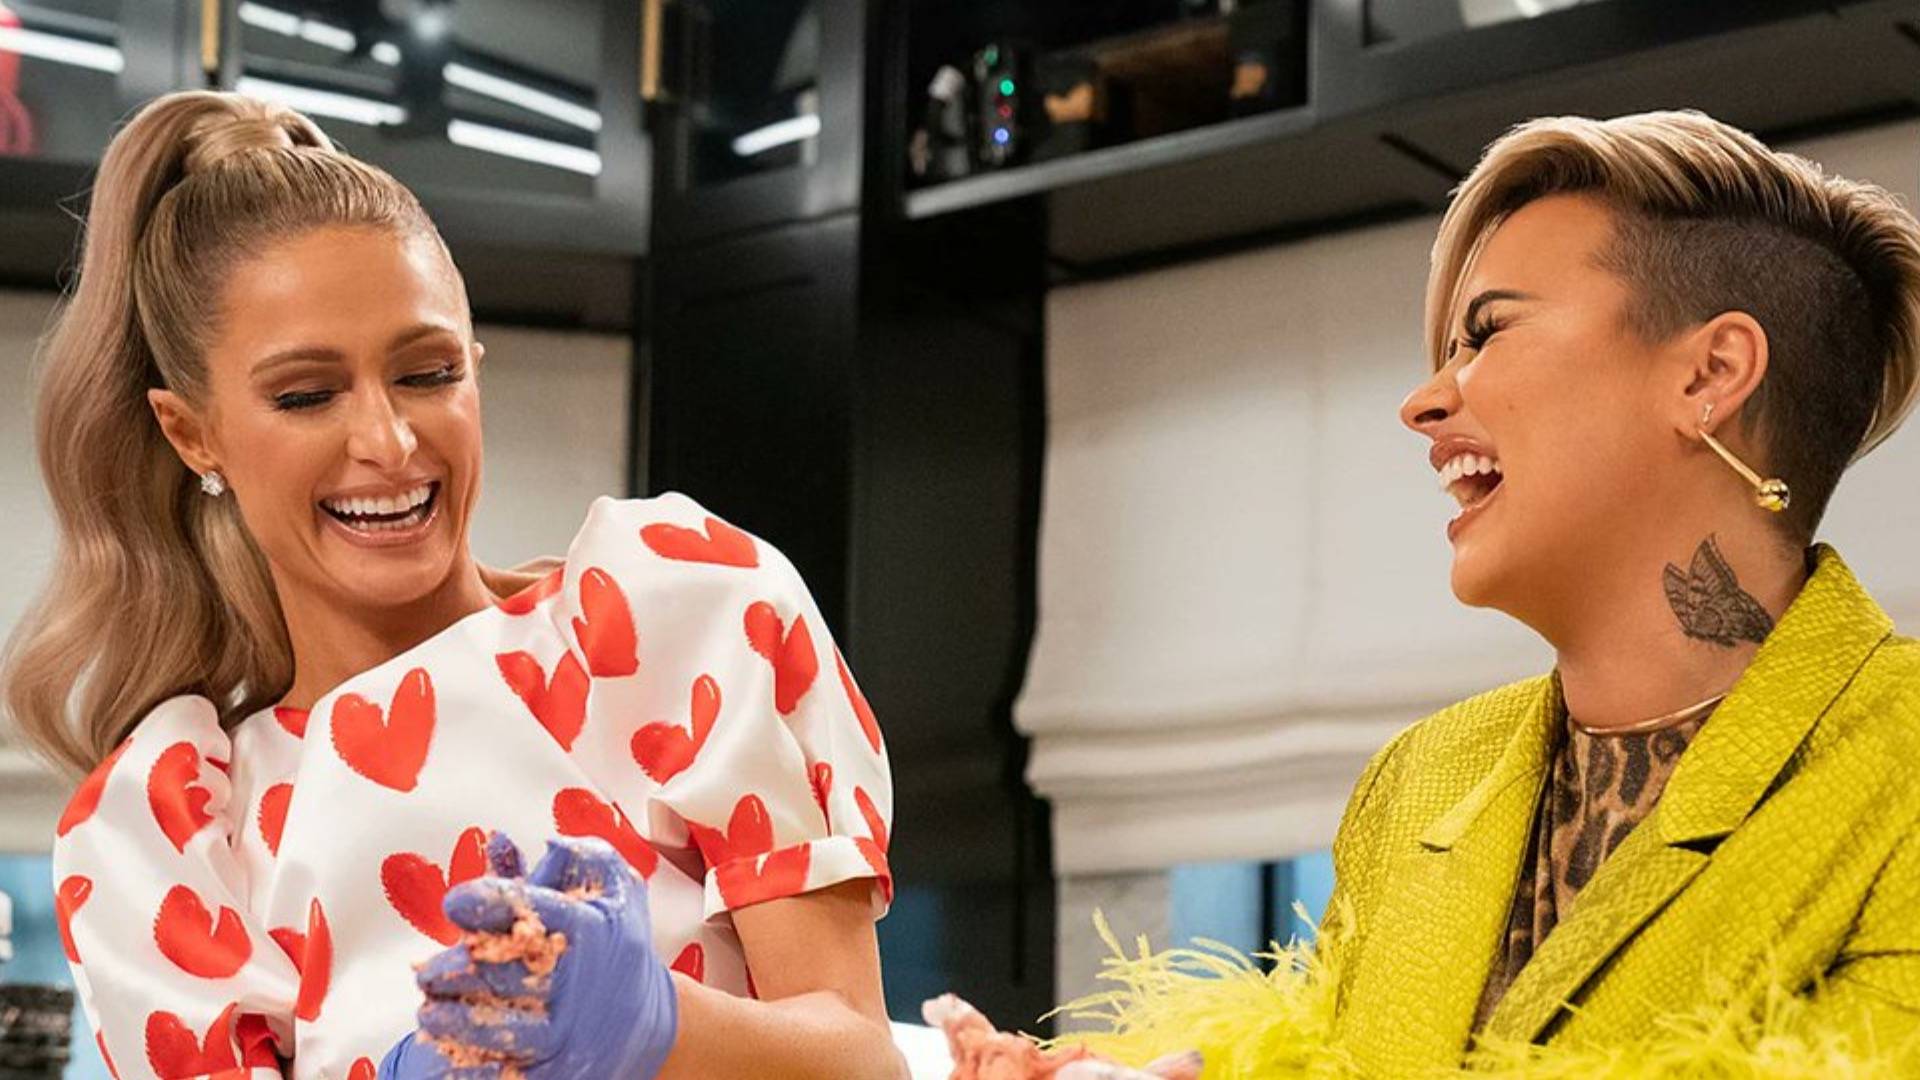 Paris Hilton and Demi Lovato laughing in the kitchen in a scene on 'Cooking With Paris' 